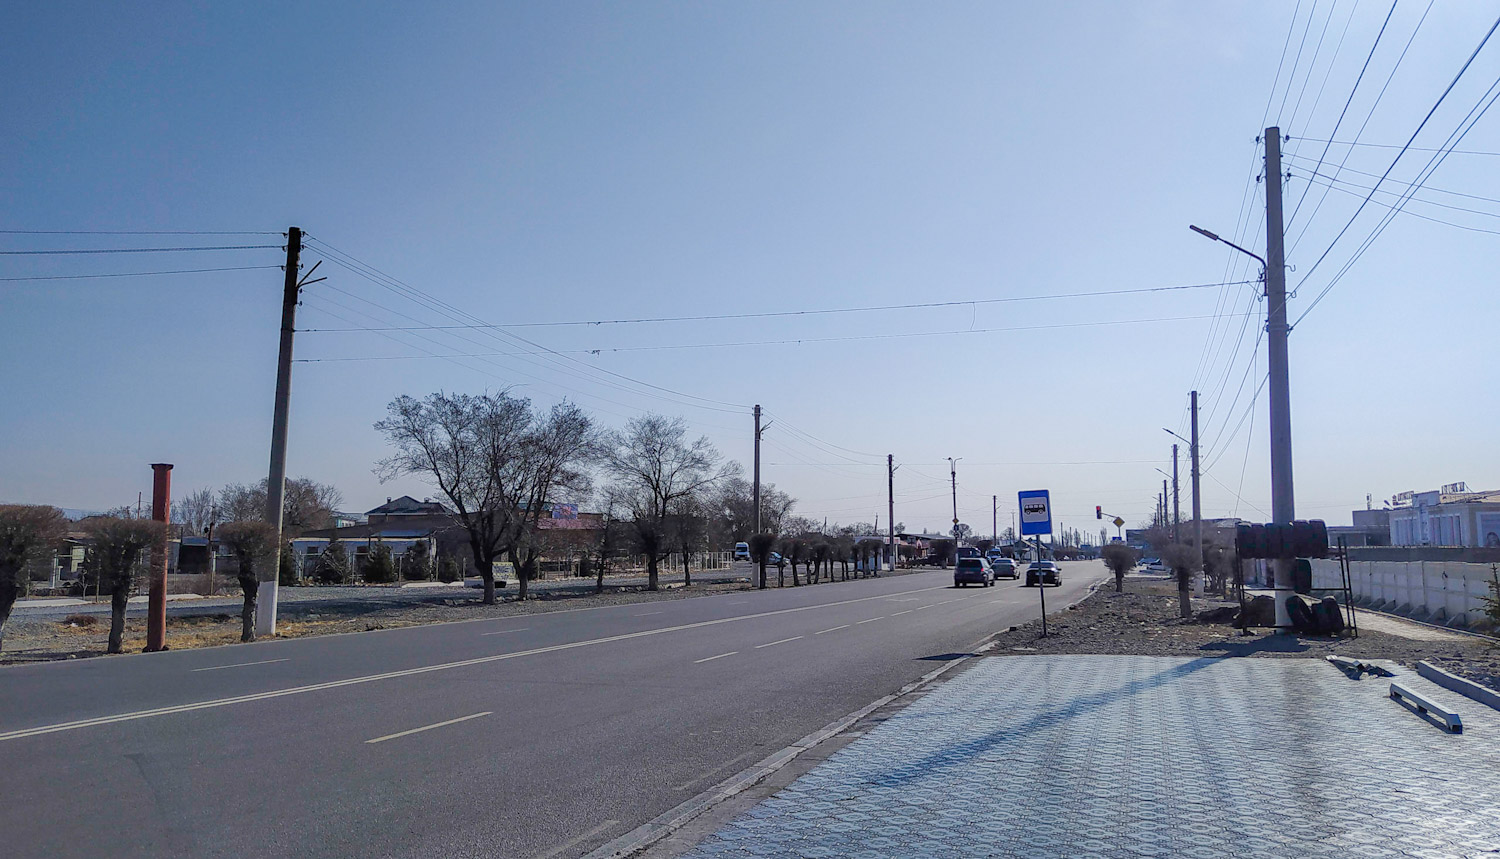 Balyktchy — Trolleybus Line, Unfinished Construction